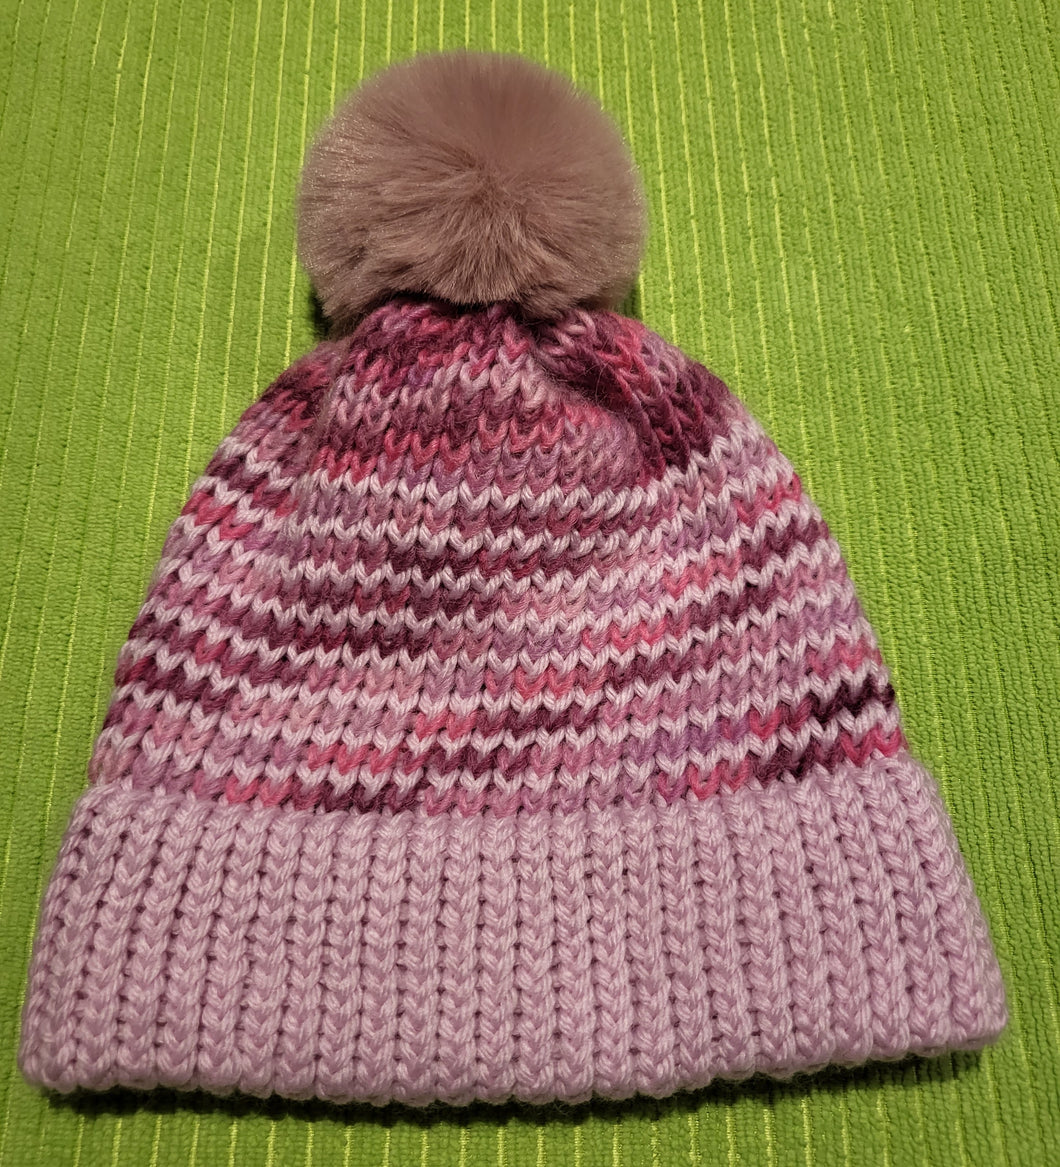 Beanie - Baby/Toddler - Pink band with pink contrast stripes